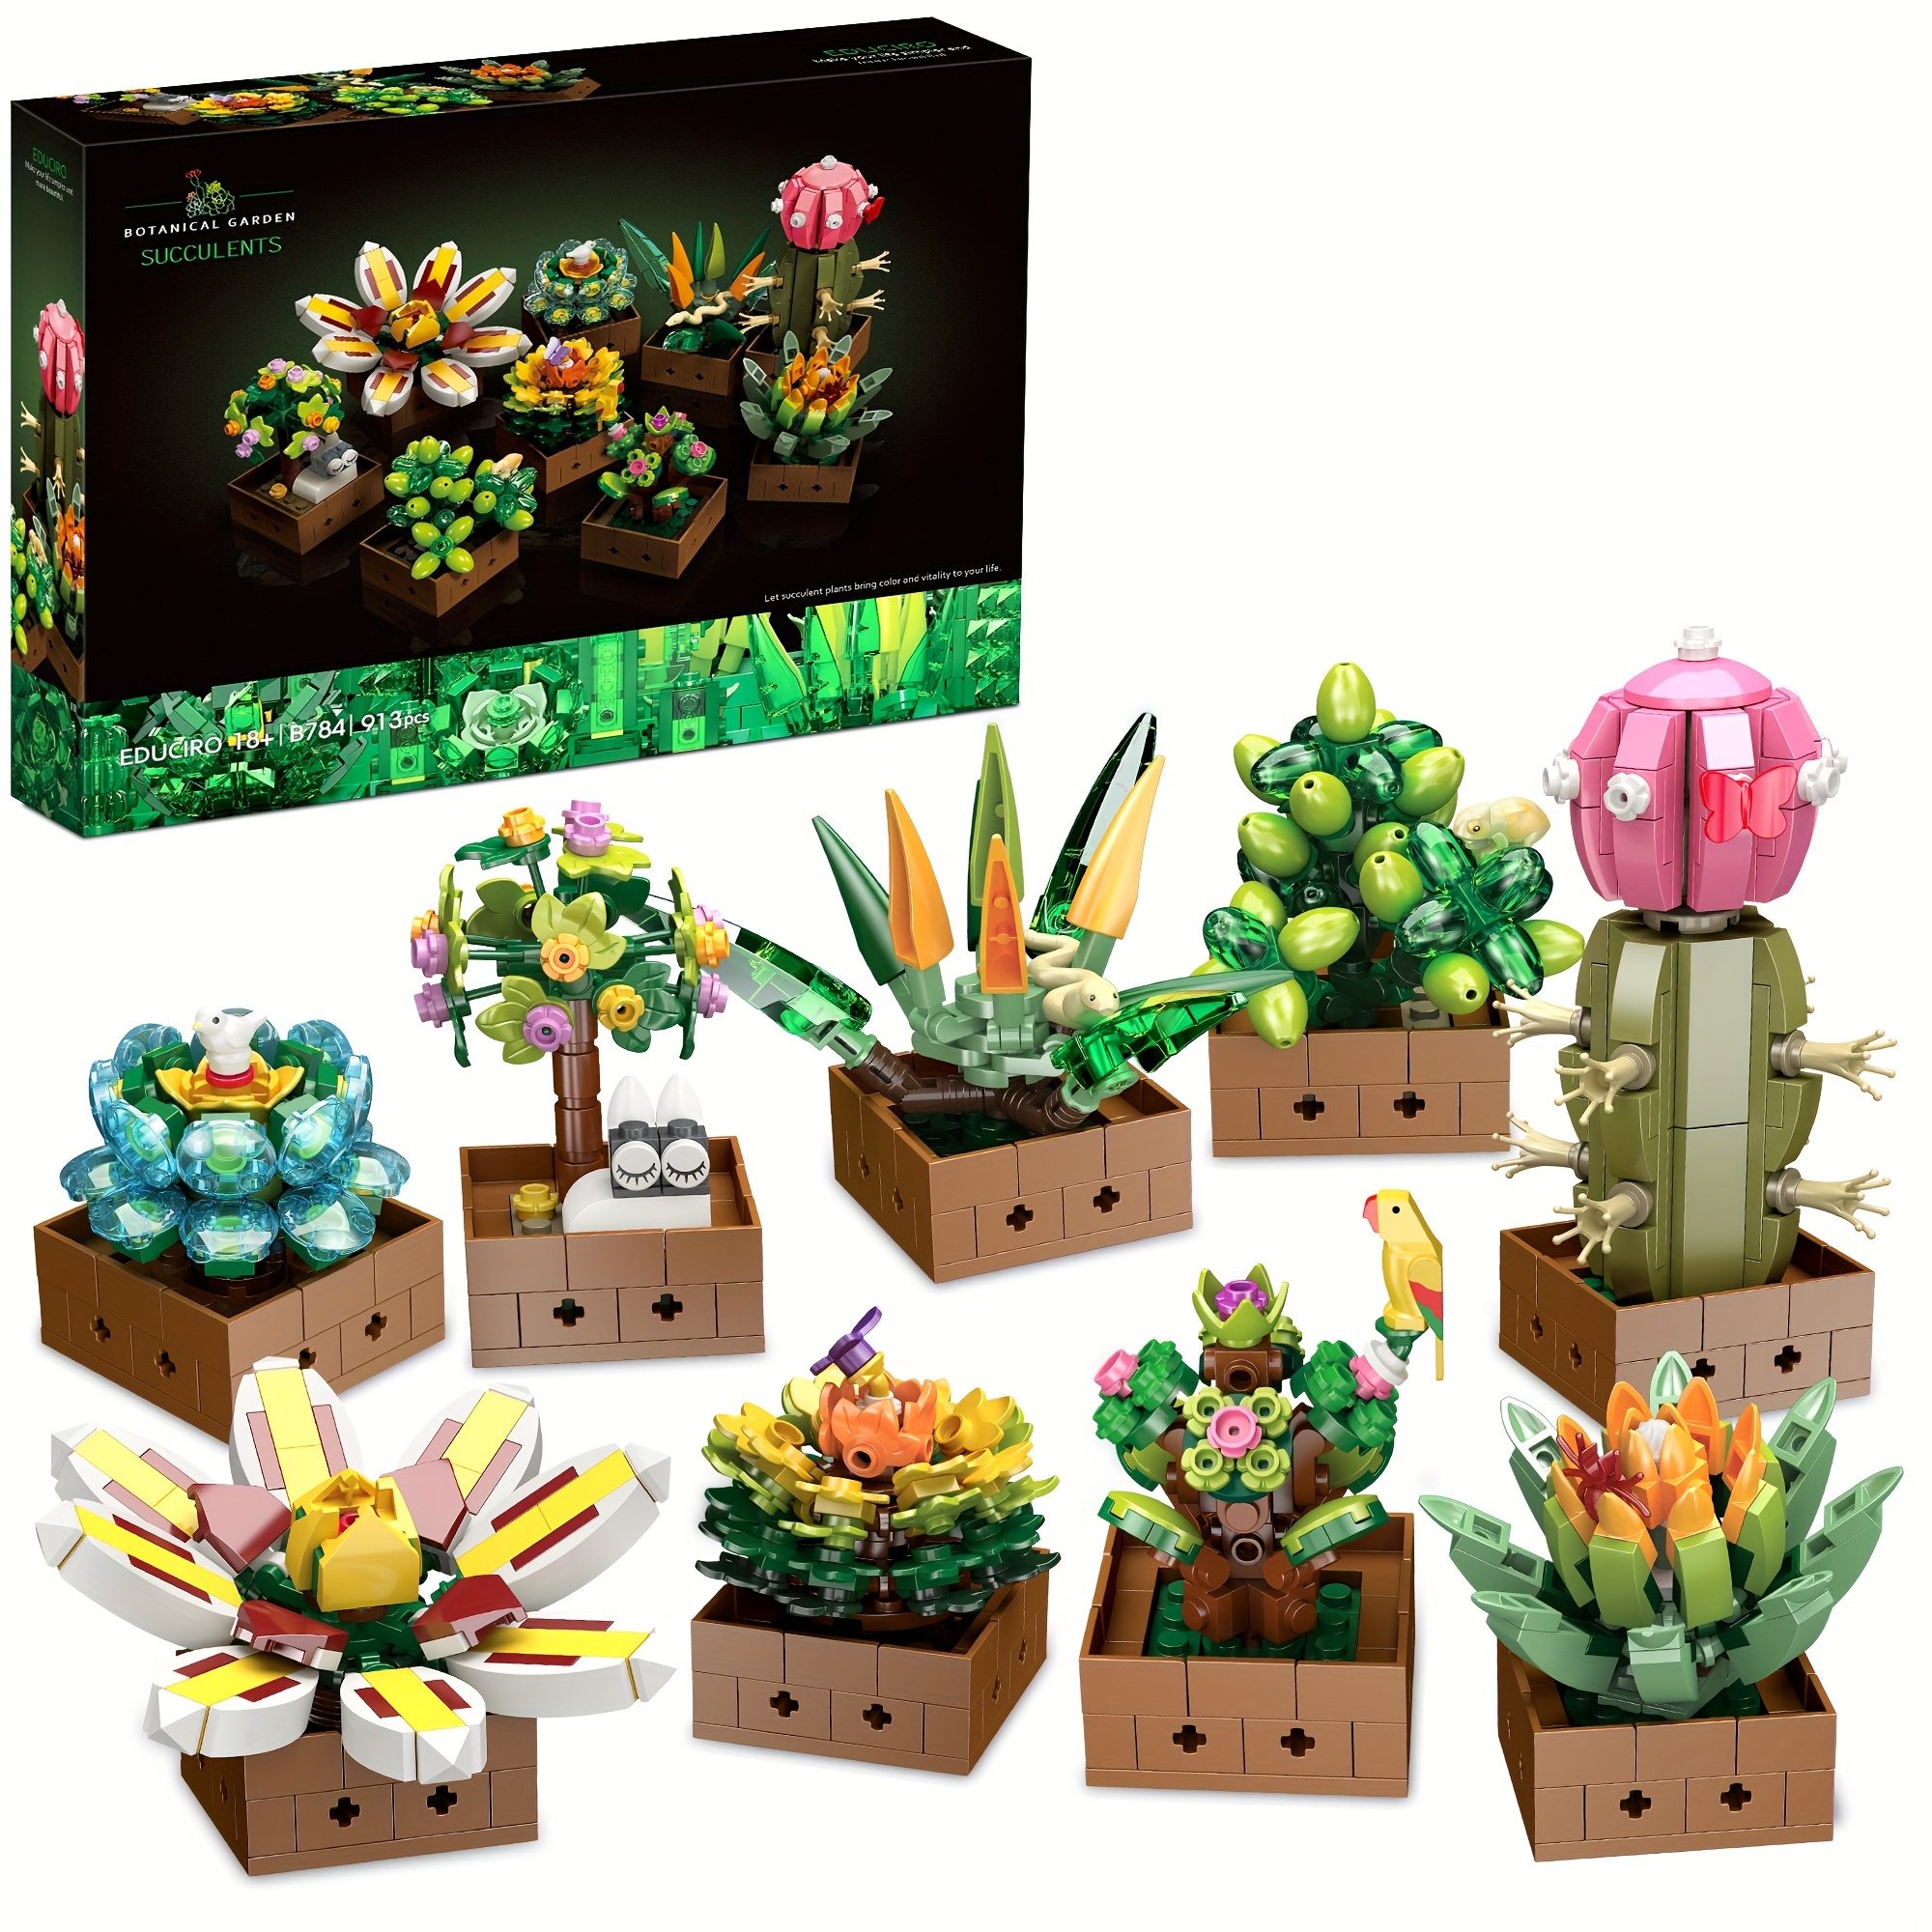 

Flower Botanical Bonsai Building Set, Succulent Building Toys - 9 Pack, For Home Decor, Valentine's Day, Mother's Day, Christmas For Adults And Kids - 913pcs